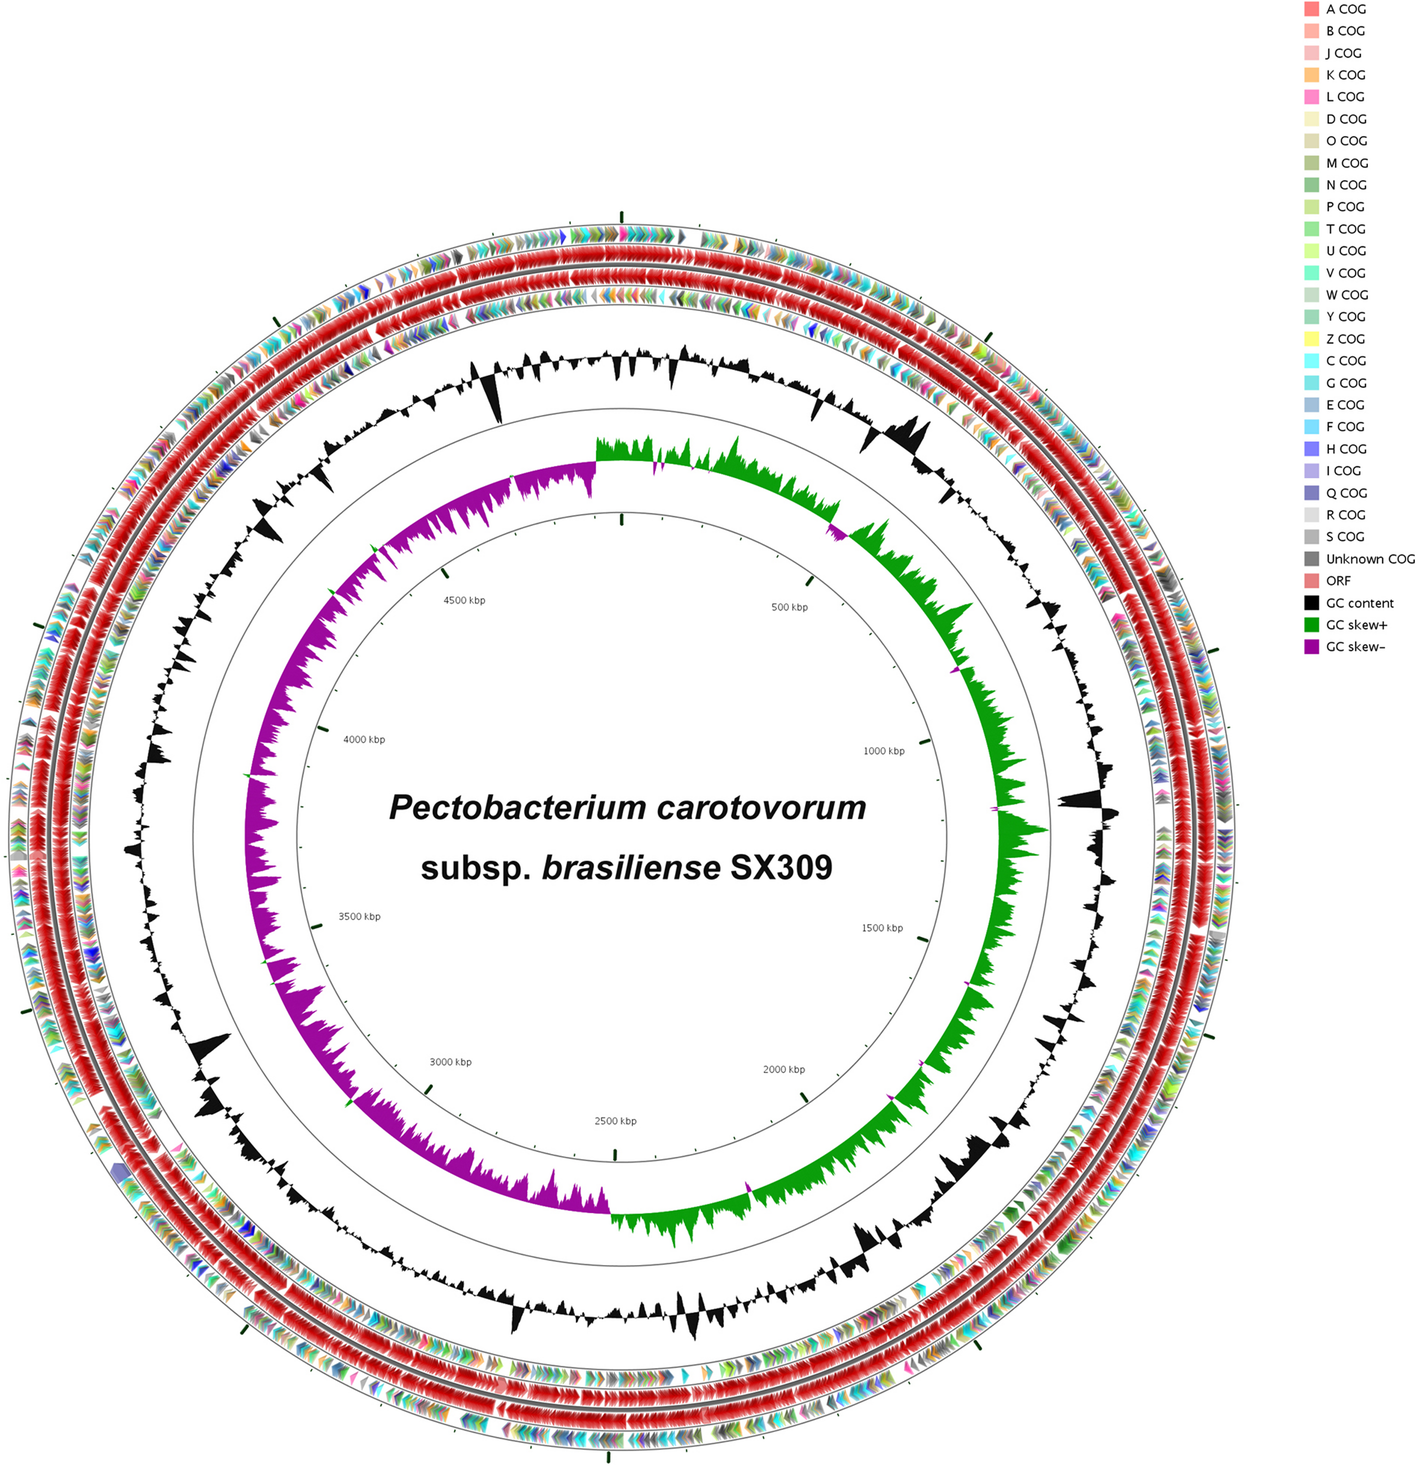 Comparative Genomic Analysis Of Pectobacterium Carotovorum Subsp Brasiliense Sx309 Provides Novel Insights Into Its Genetic And Phenotypic Features Bmc Genomics Full Text